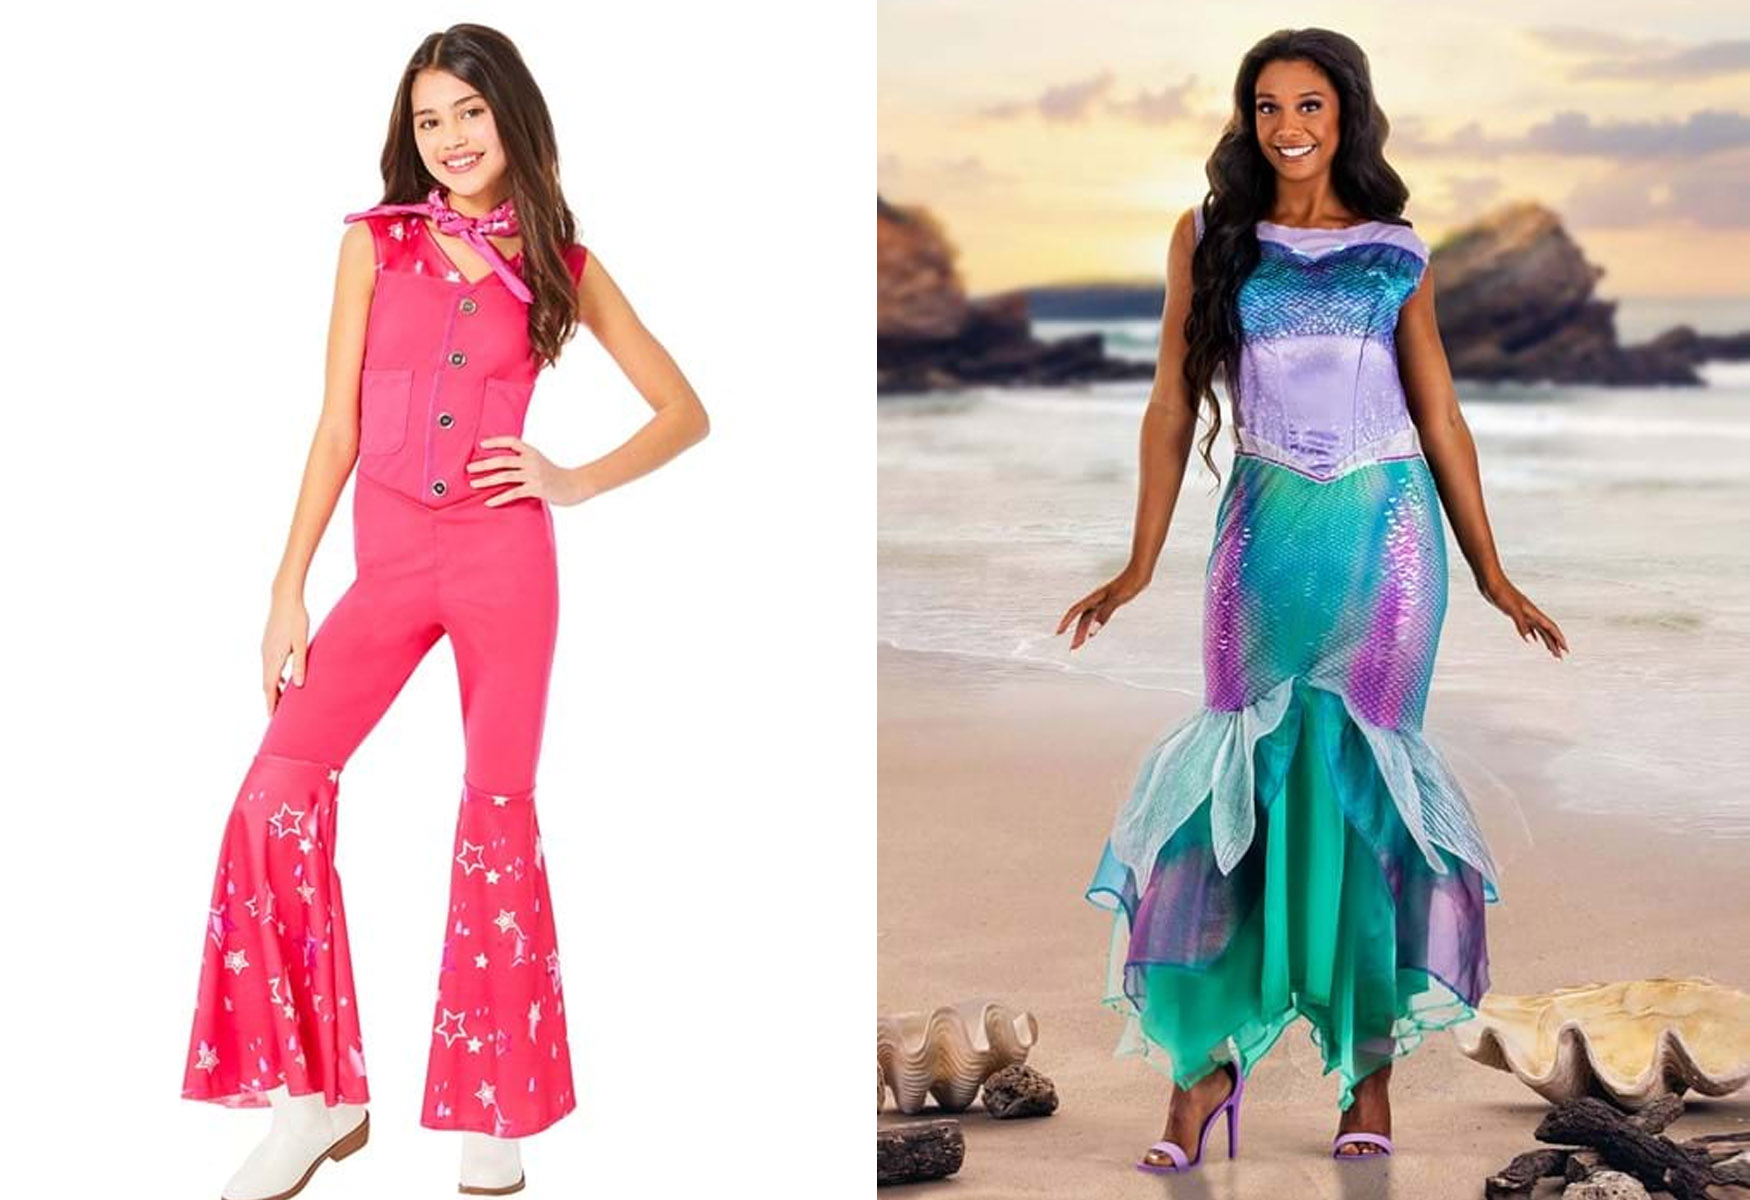 barbie-and-little-mermaid-halloween-costumes-soar-in-popularity-this-year